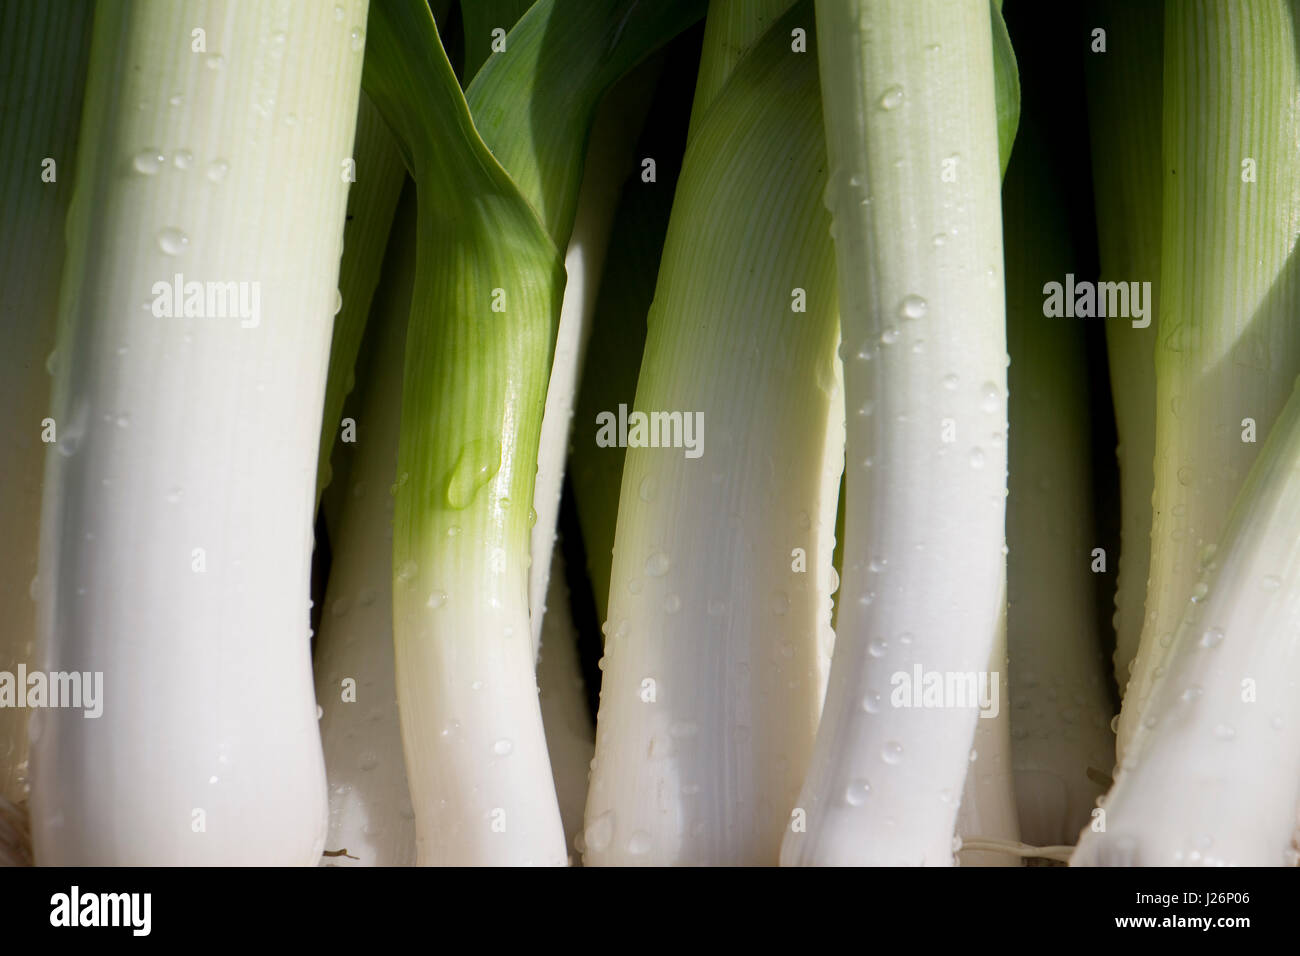 Freshly harvested leeks from a garden Stock Photo